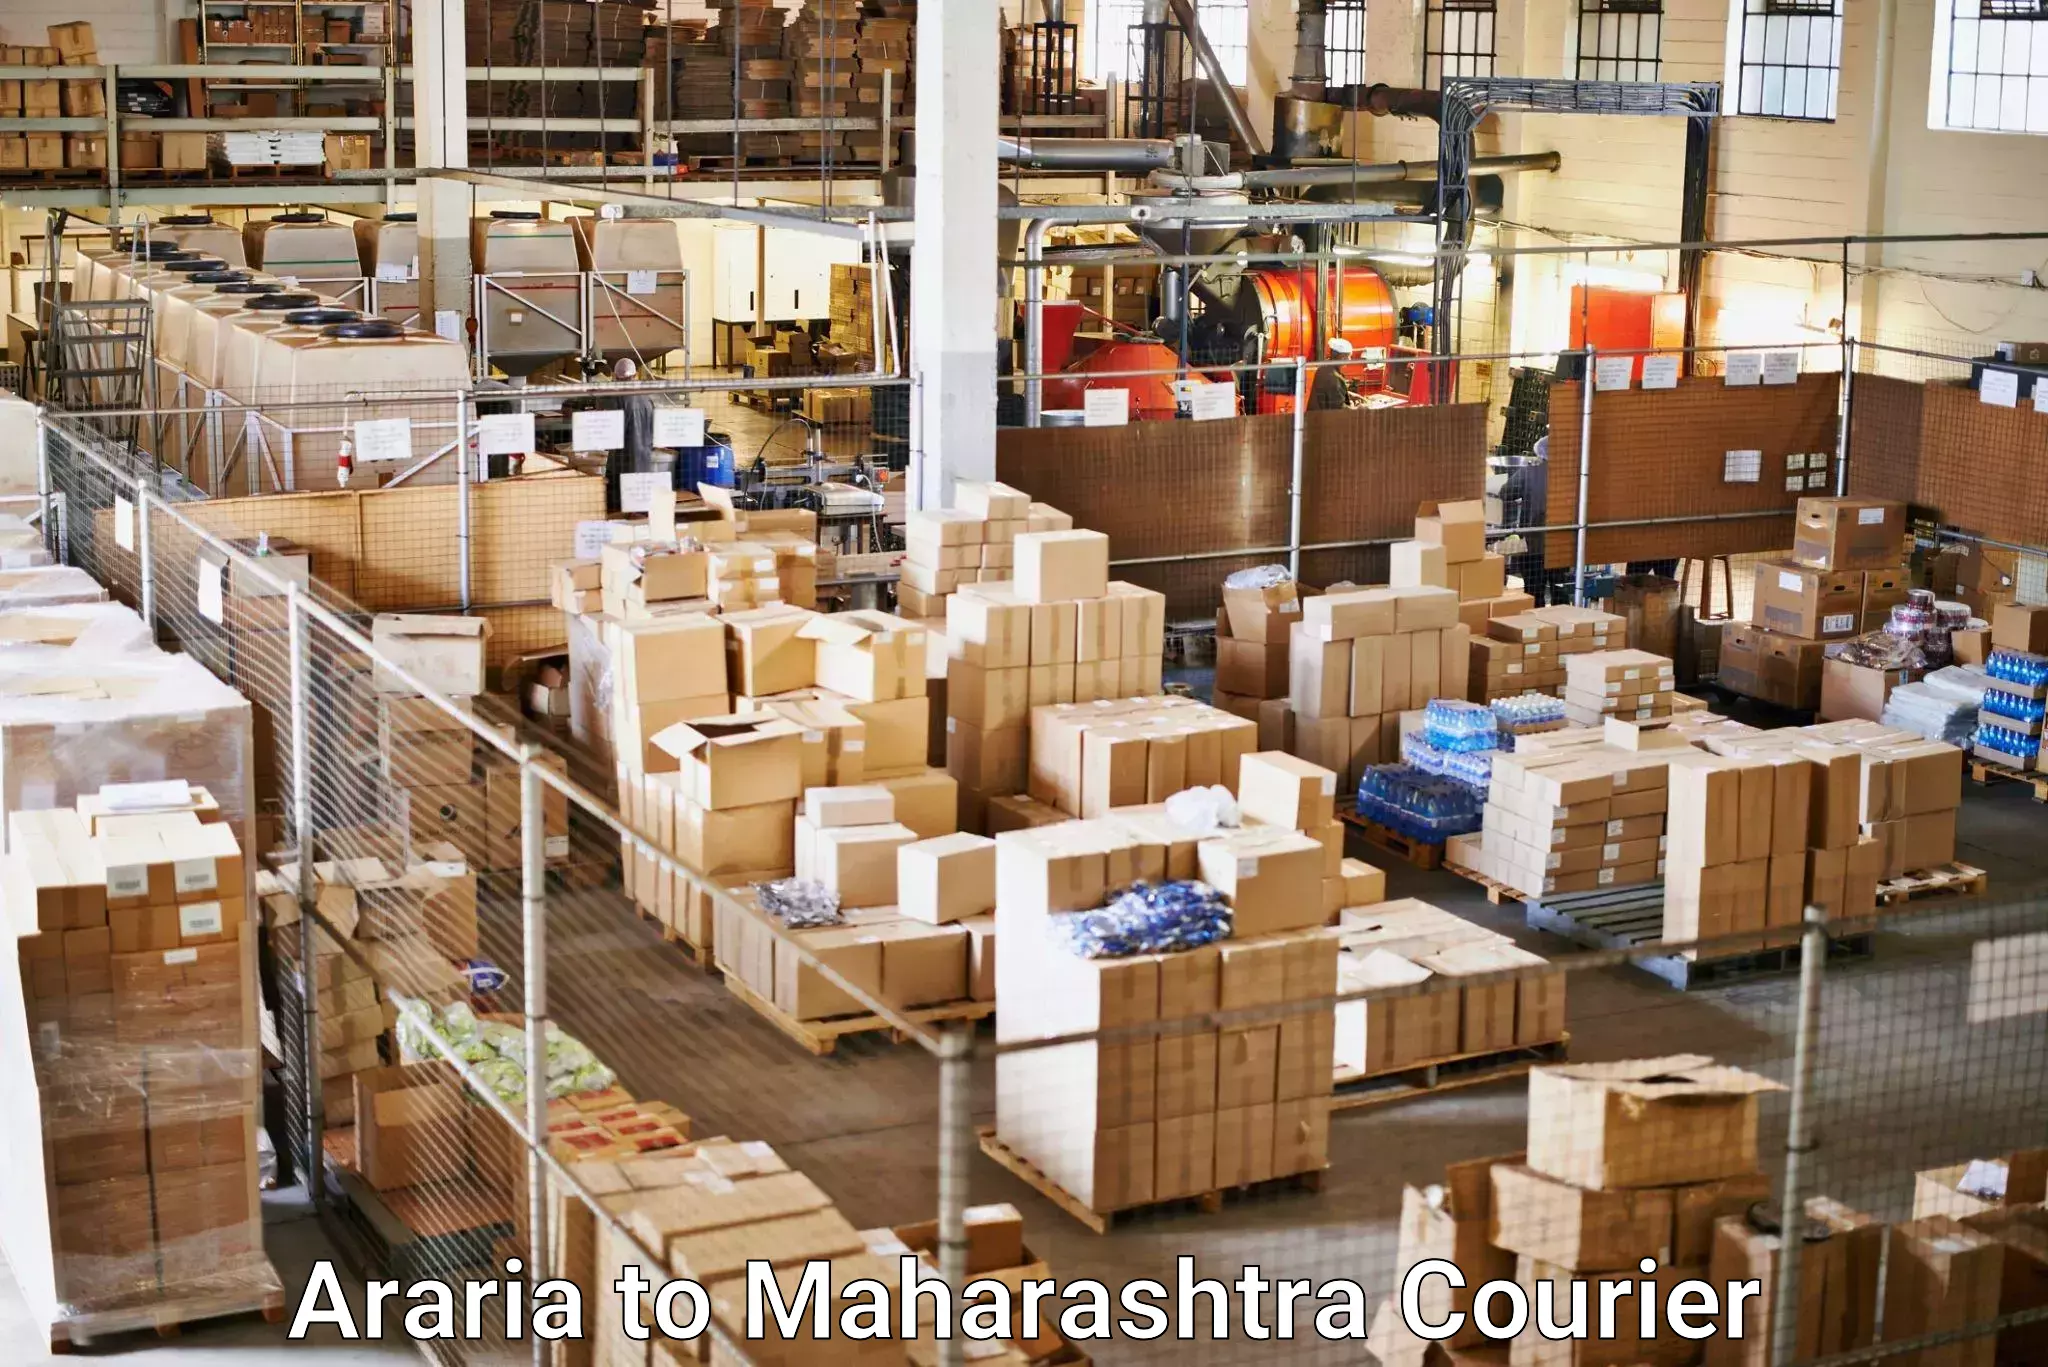 Courier service partnerships Araria to Lonikand